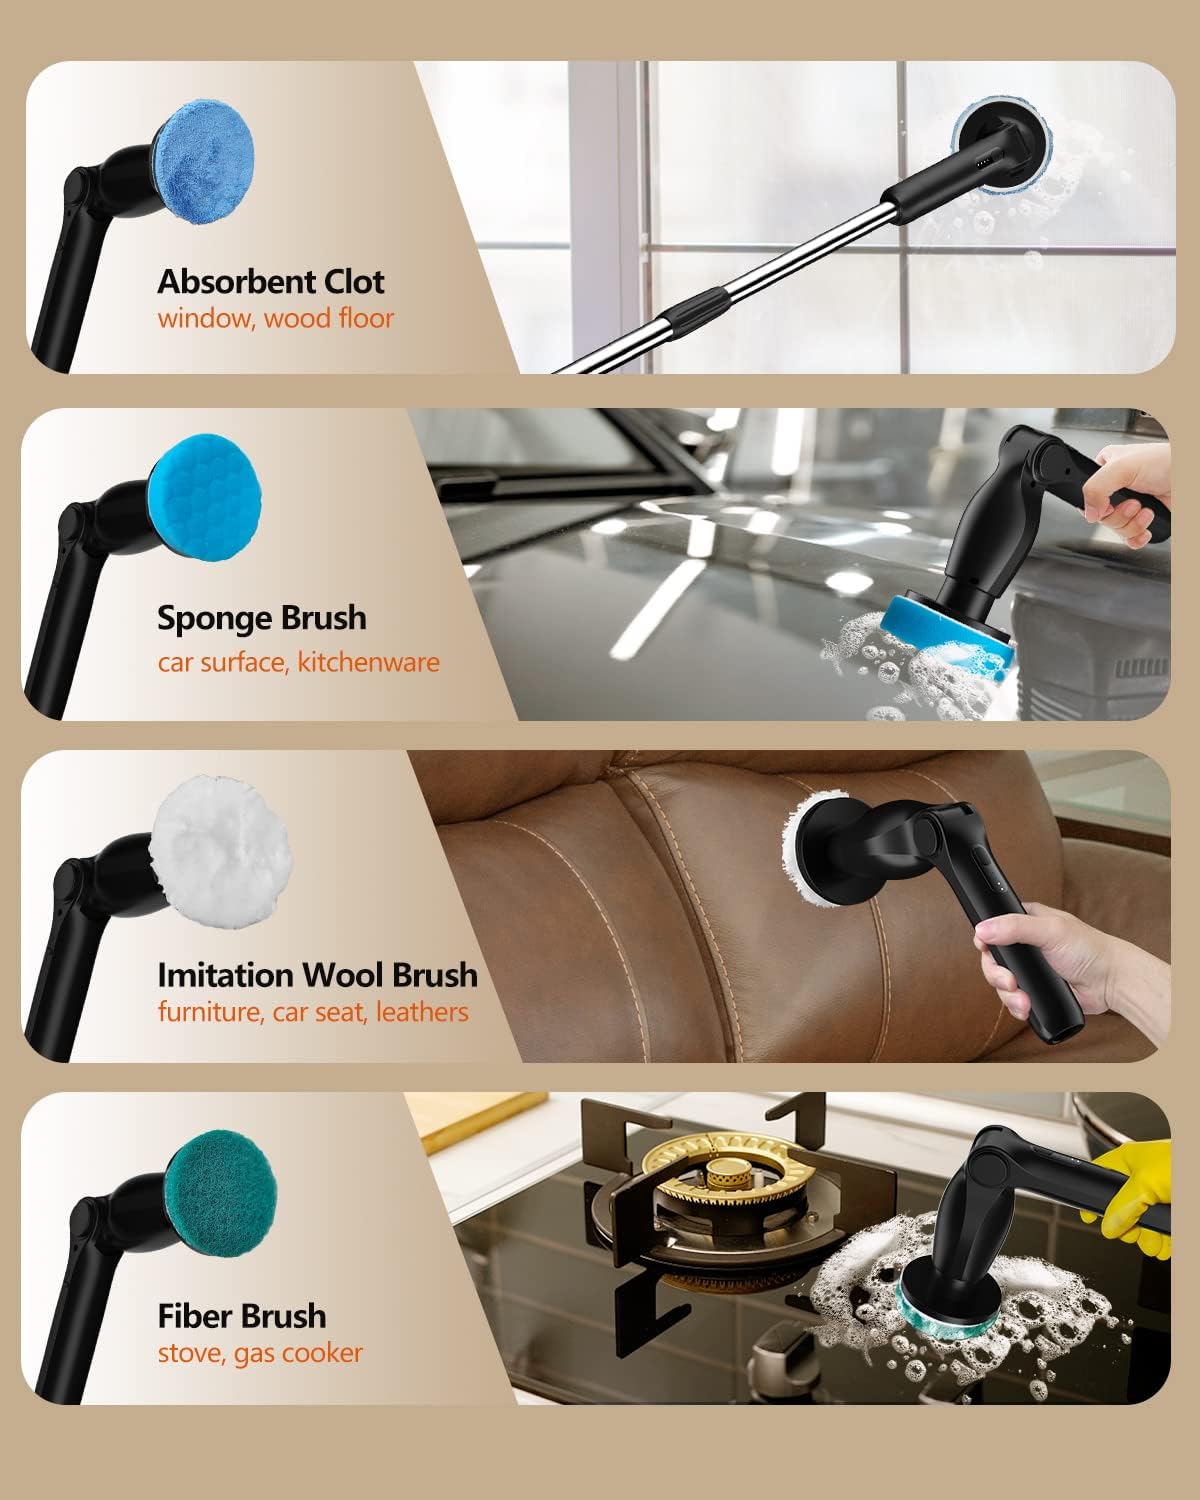 Extendable Cordless Power Scrubber For Bathrooms & Kitchen - Inspire Uplift